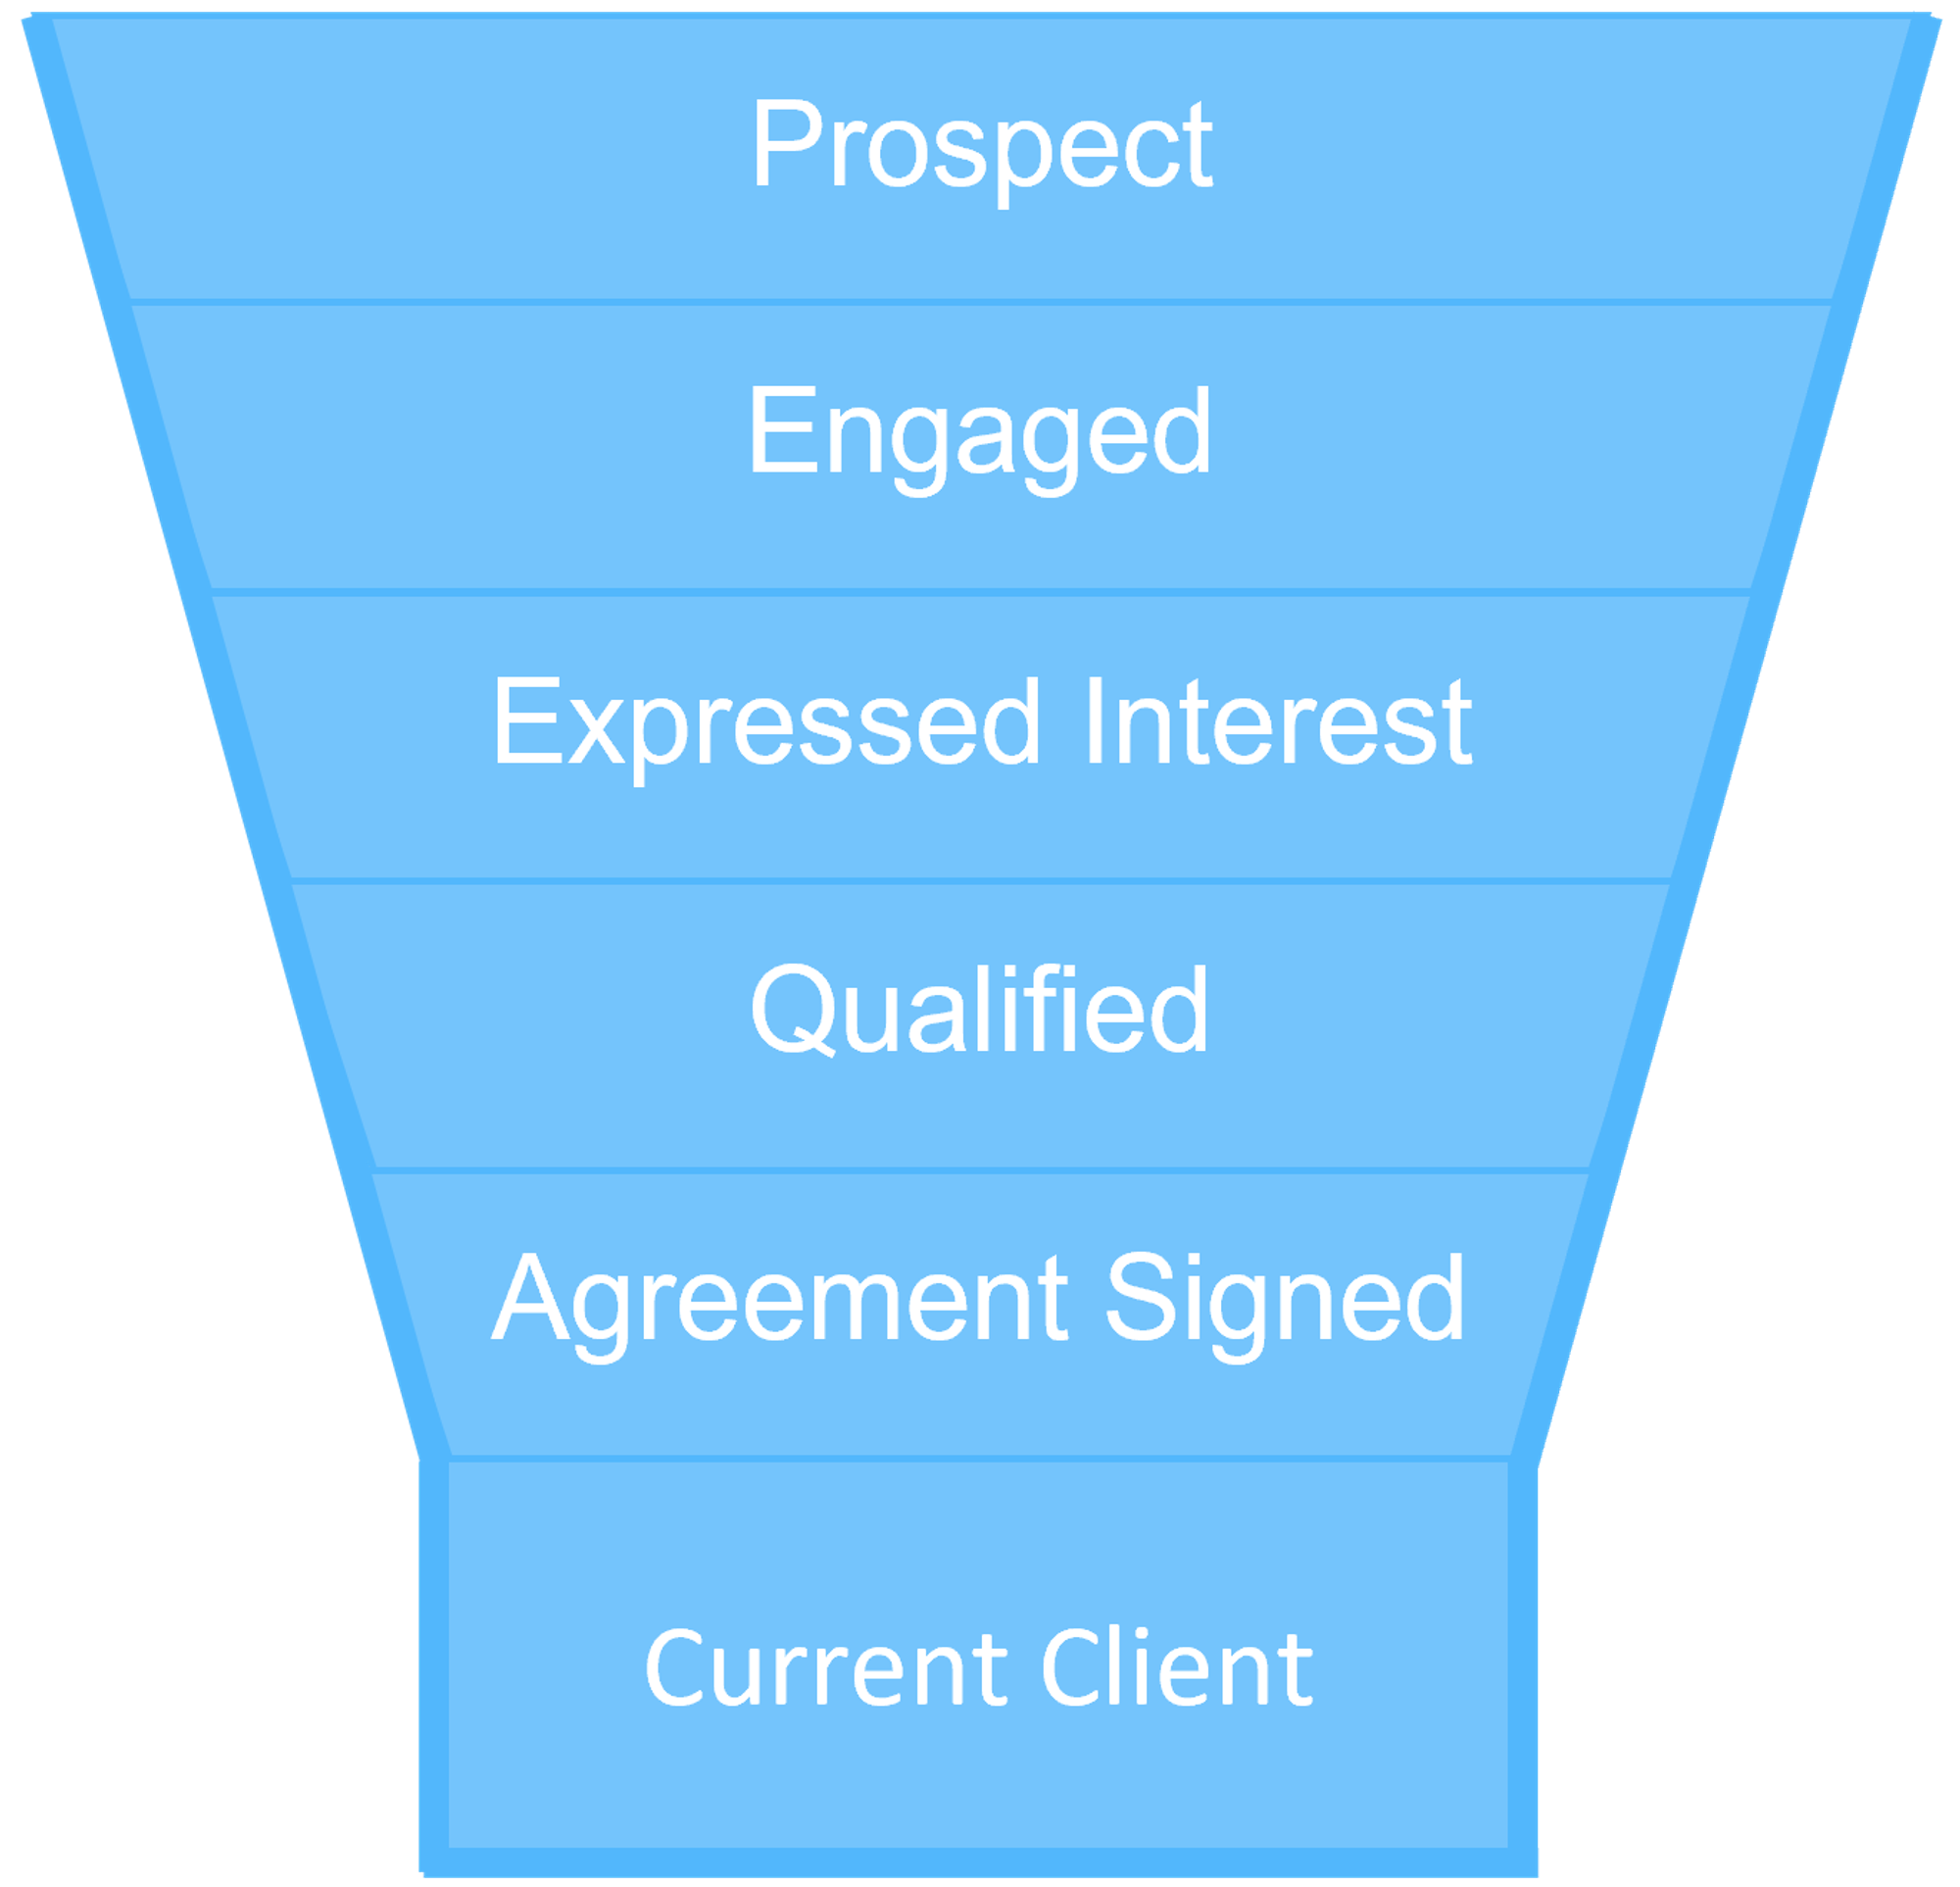 A basic sales funnel